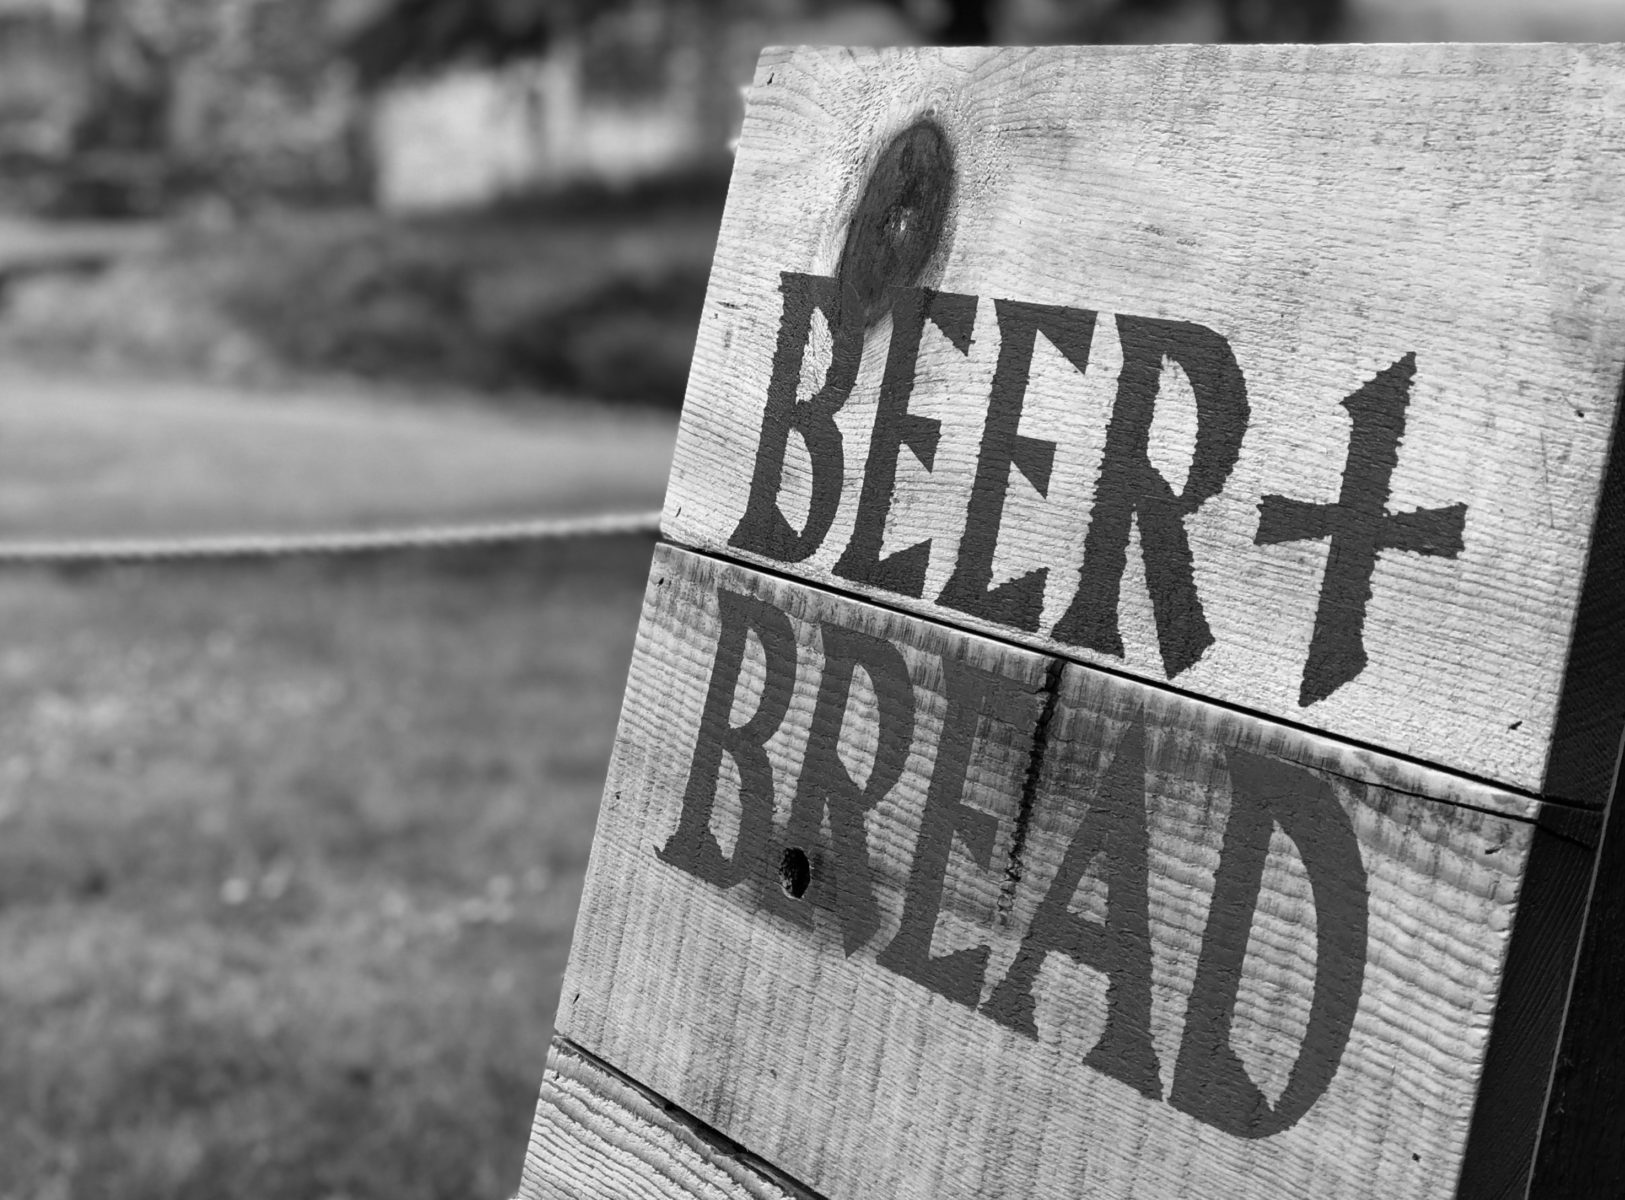 The Two Best Bs – Bread and Beer at Fountains Abbey